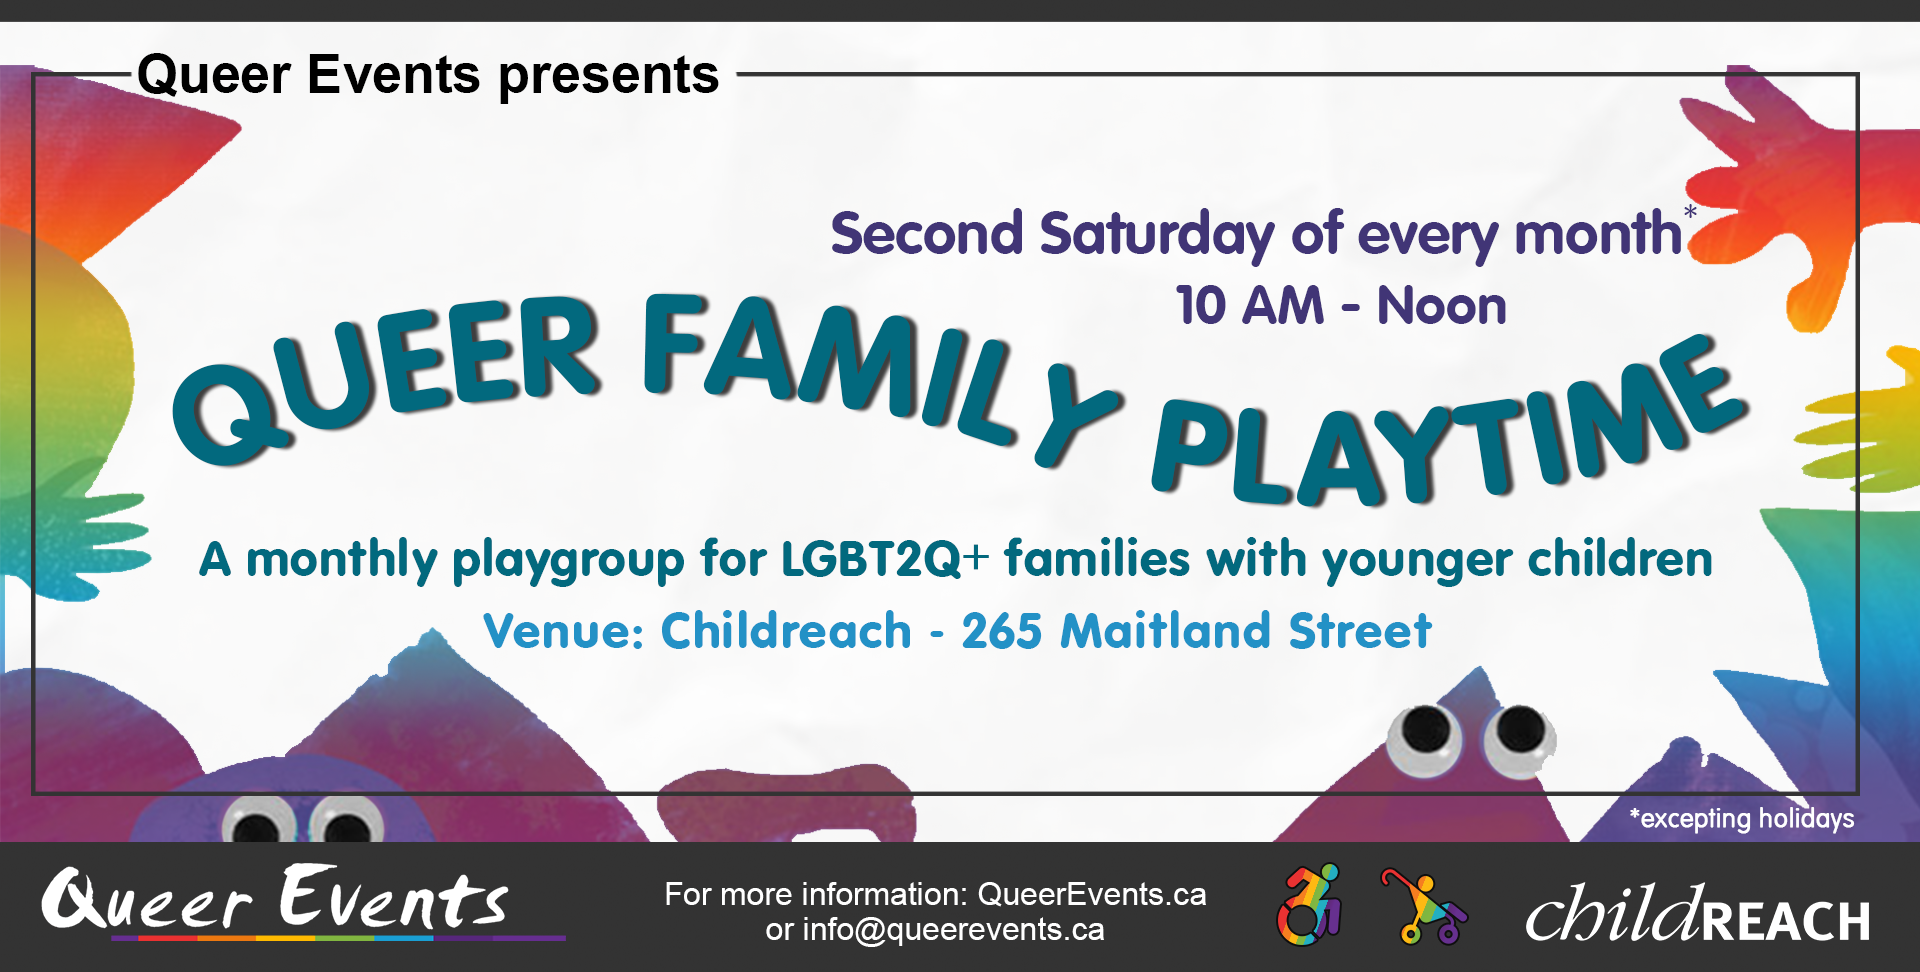 QueerEvents.ca Listing - Queer Family Playtime